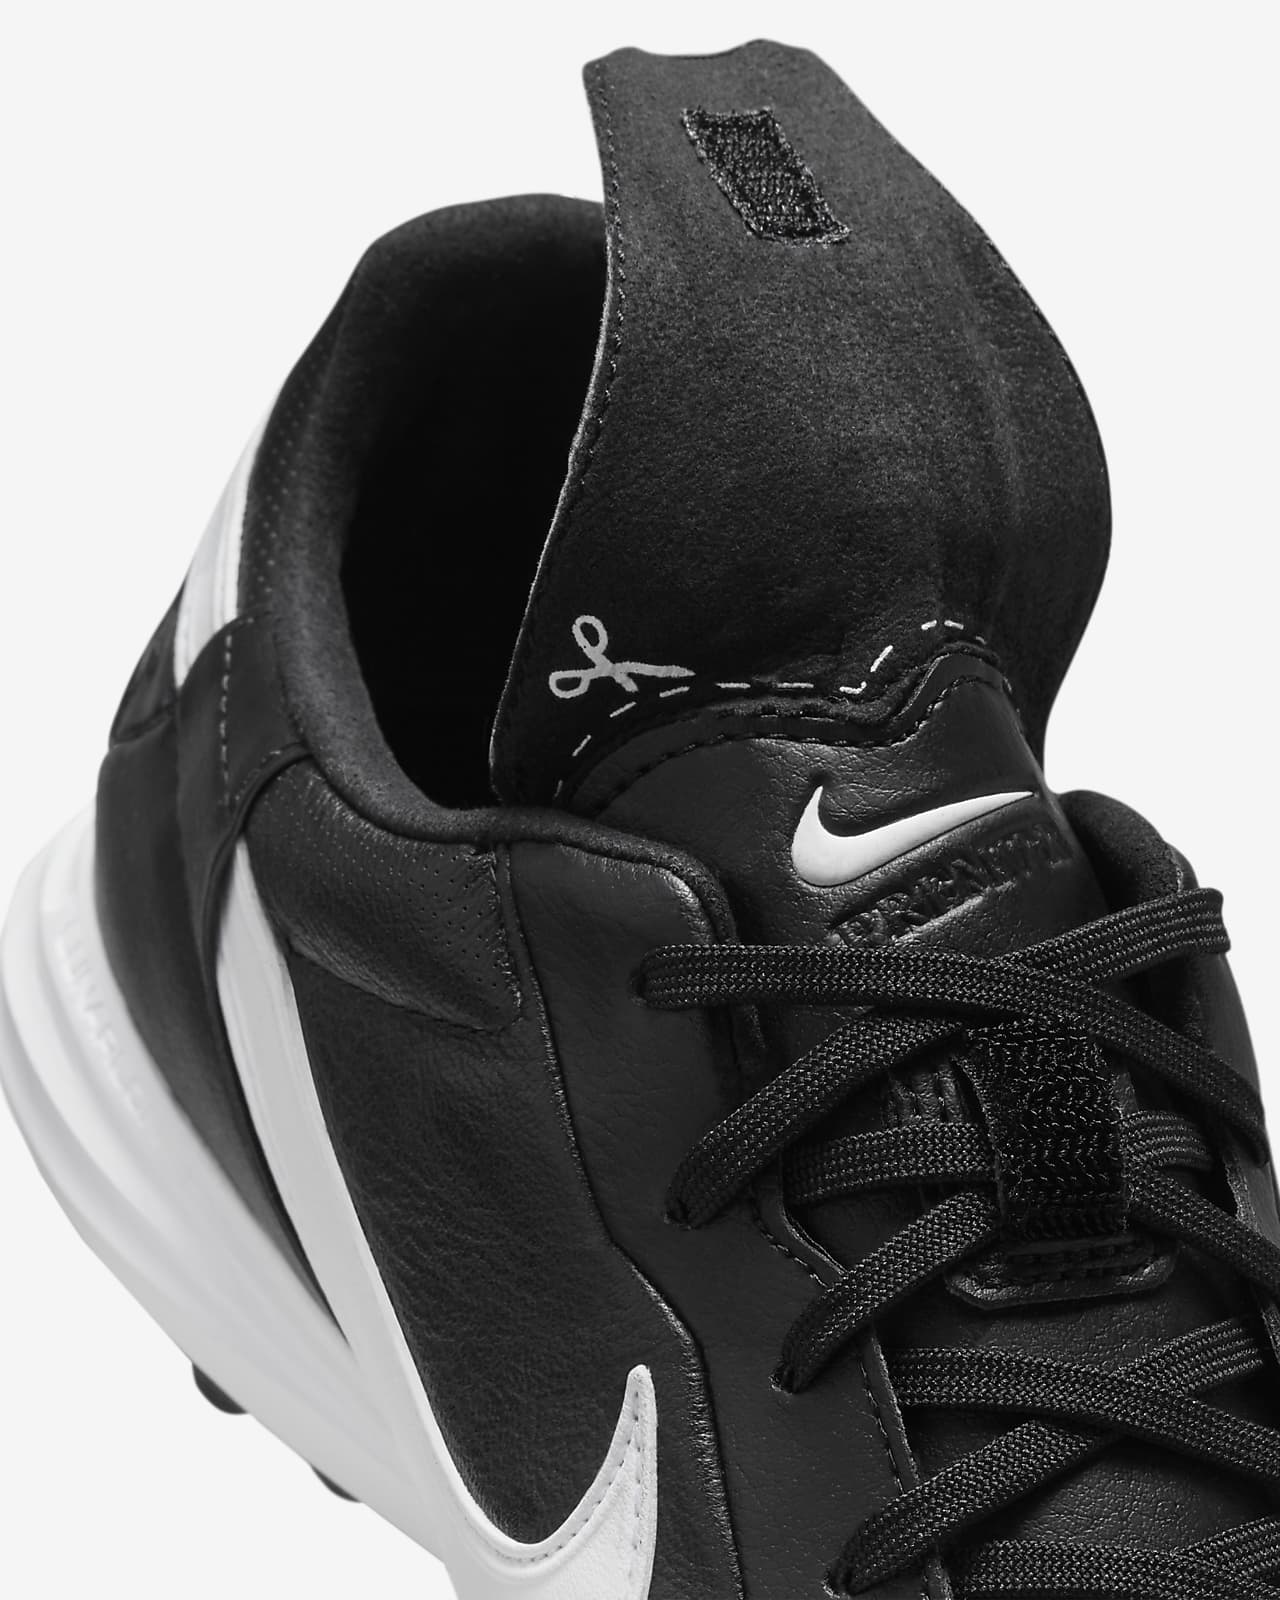 NikePremier 3 TF Low-Top Football Shoes